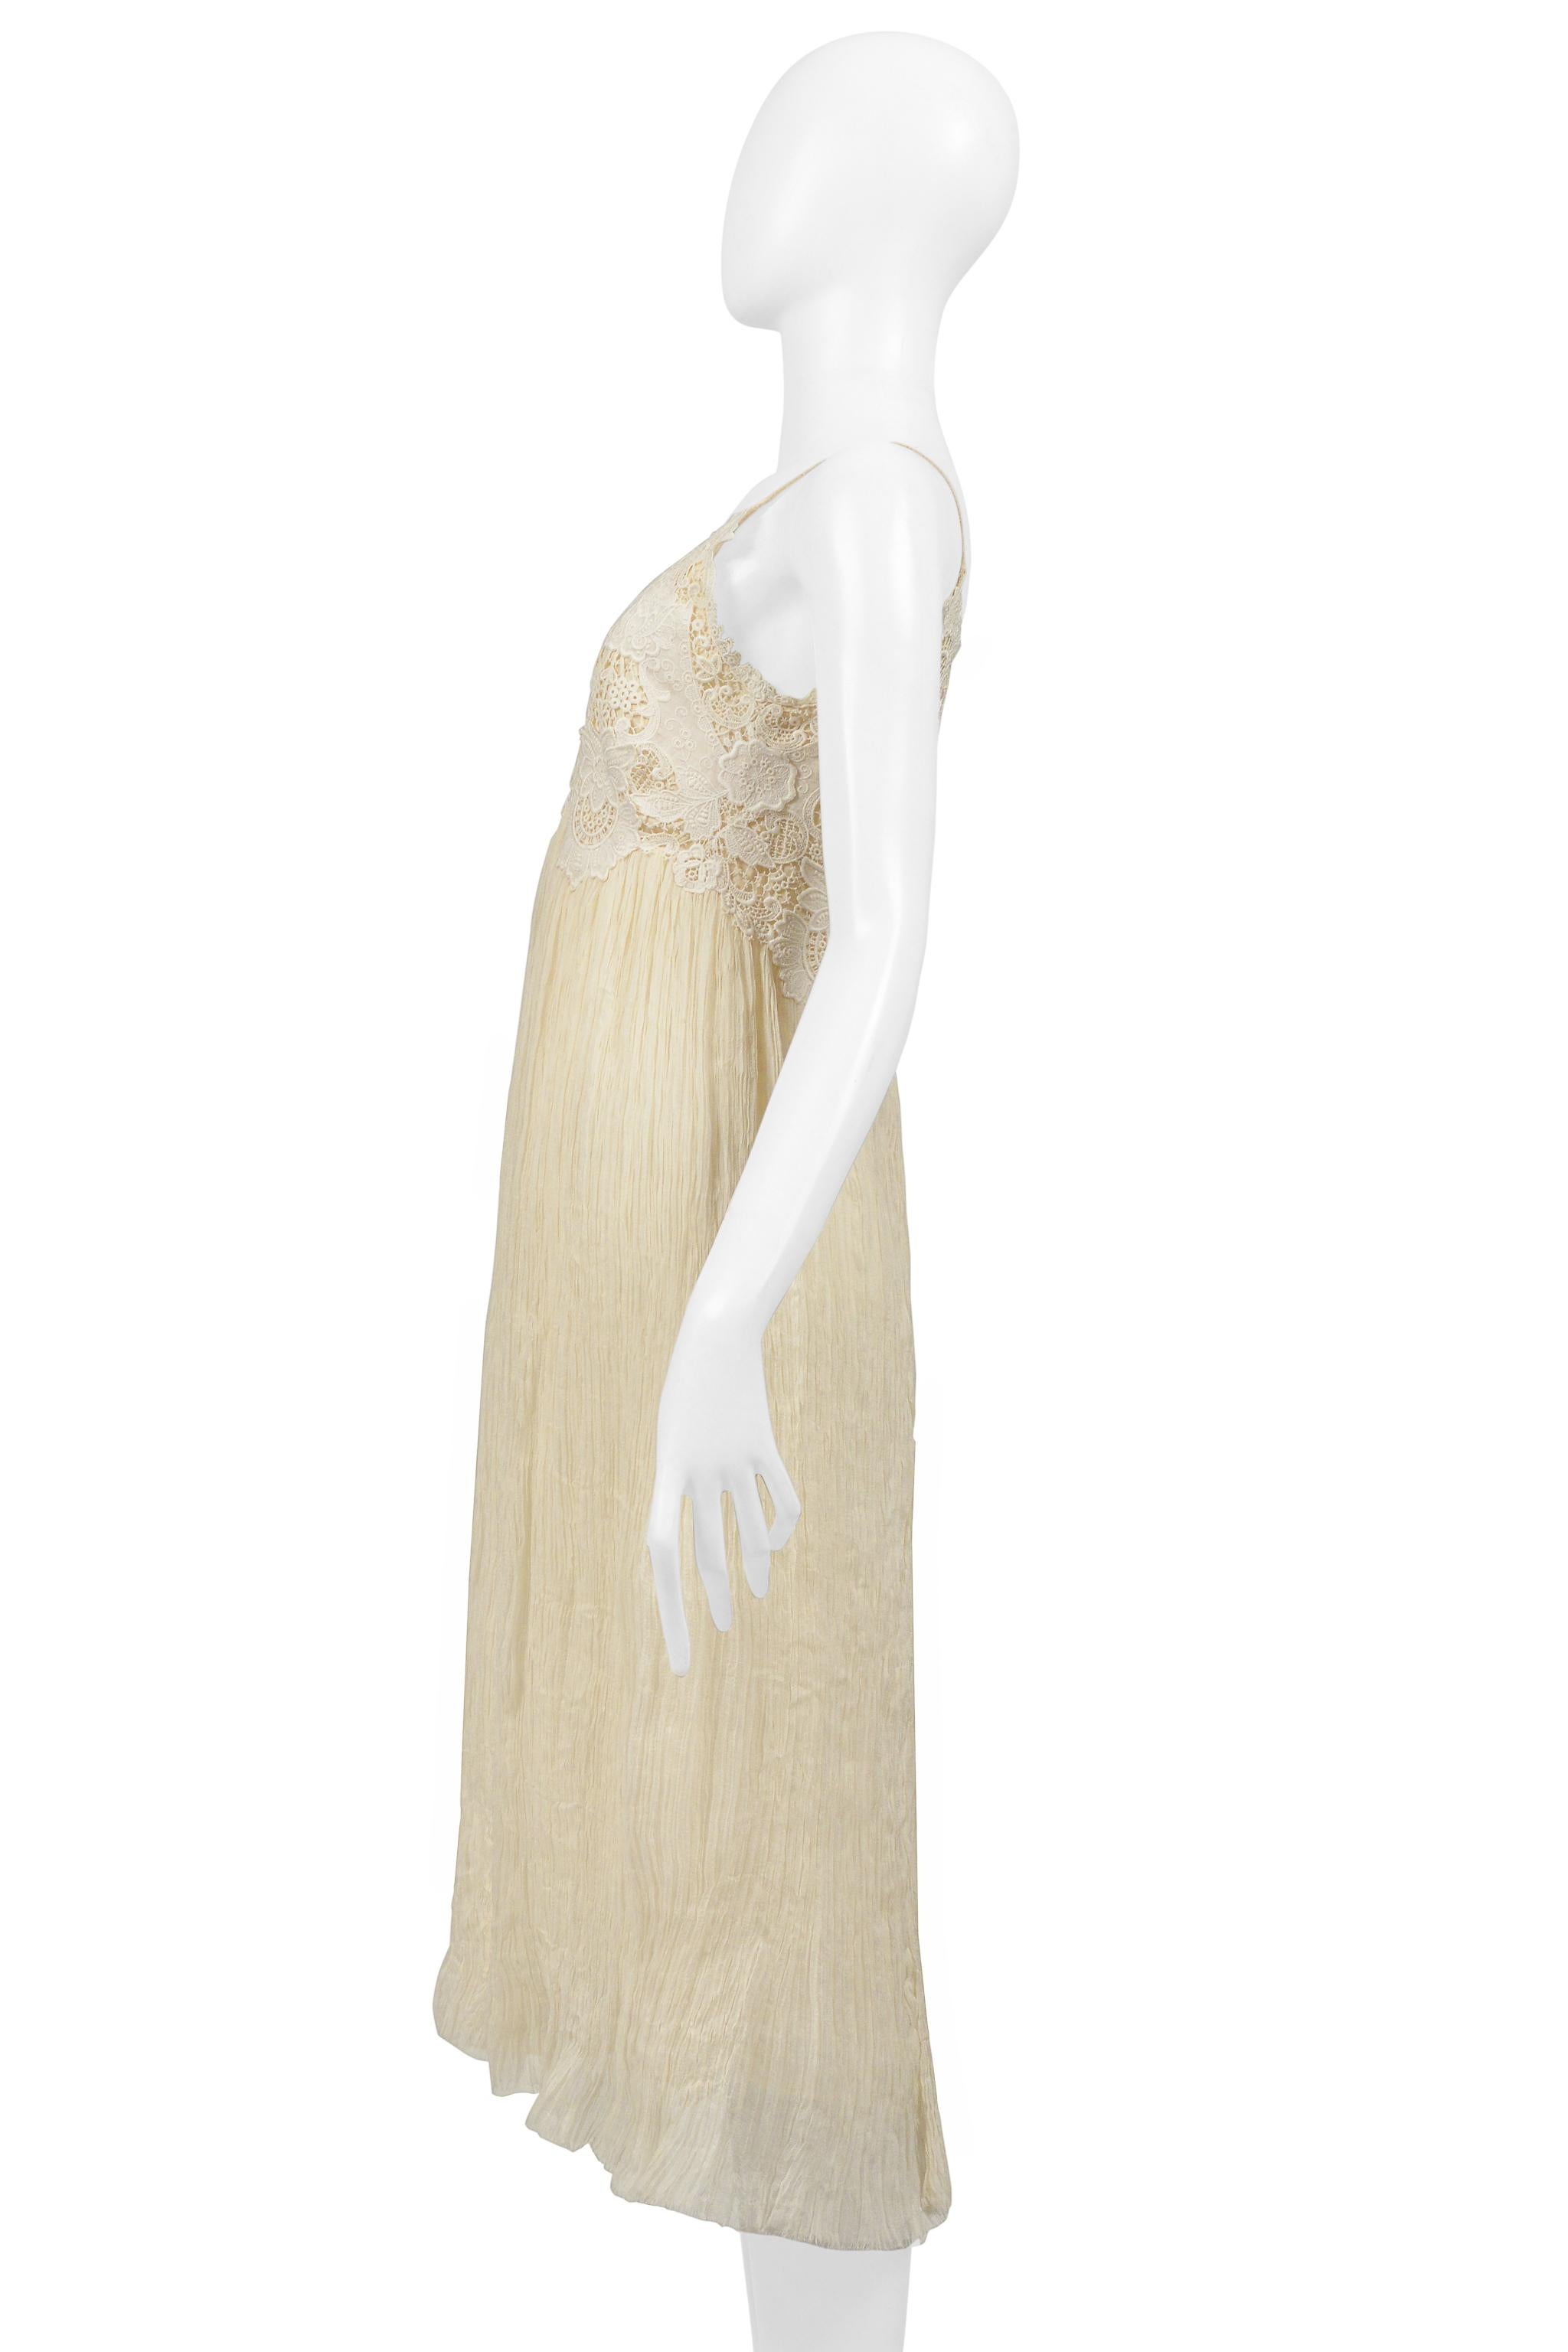 Alexander McQueen Off White Crinkle Dress W Lace Bodice 2005 For Sale 5